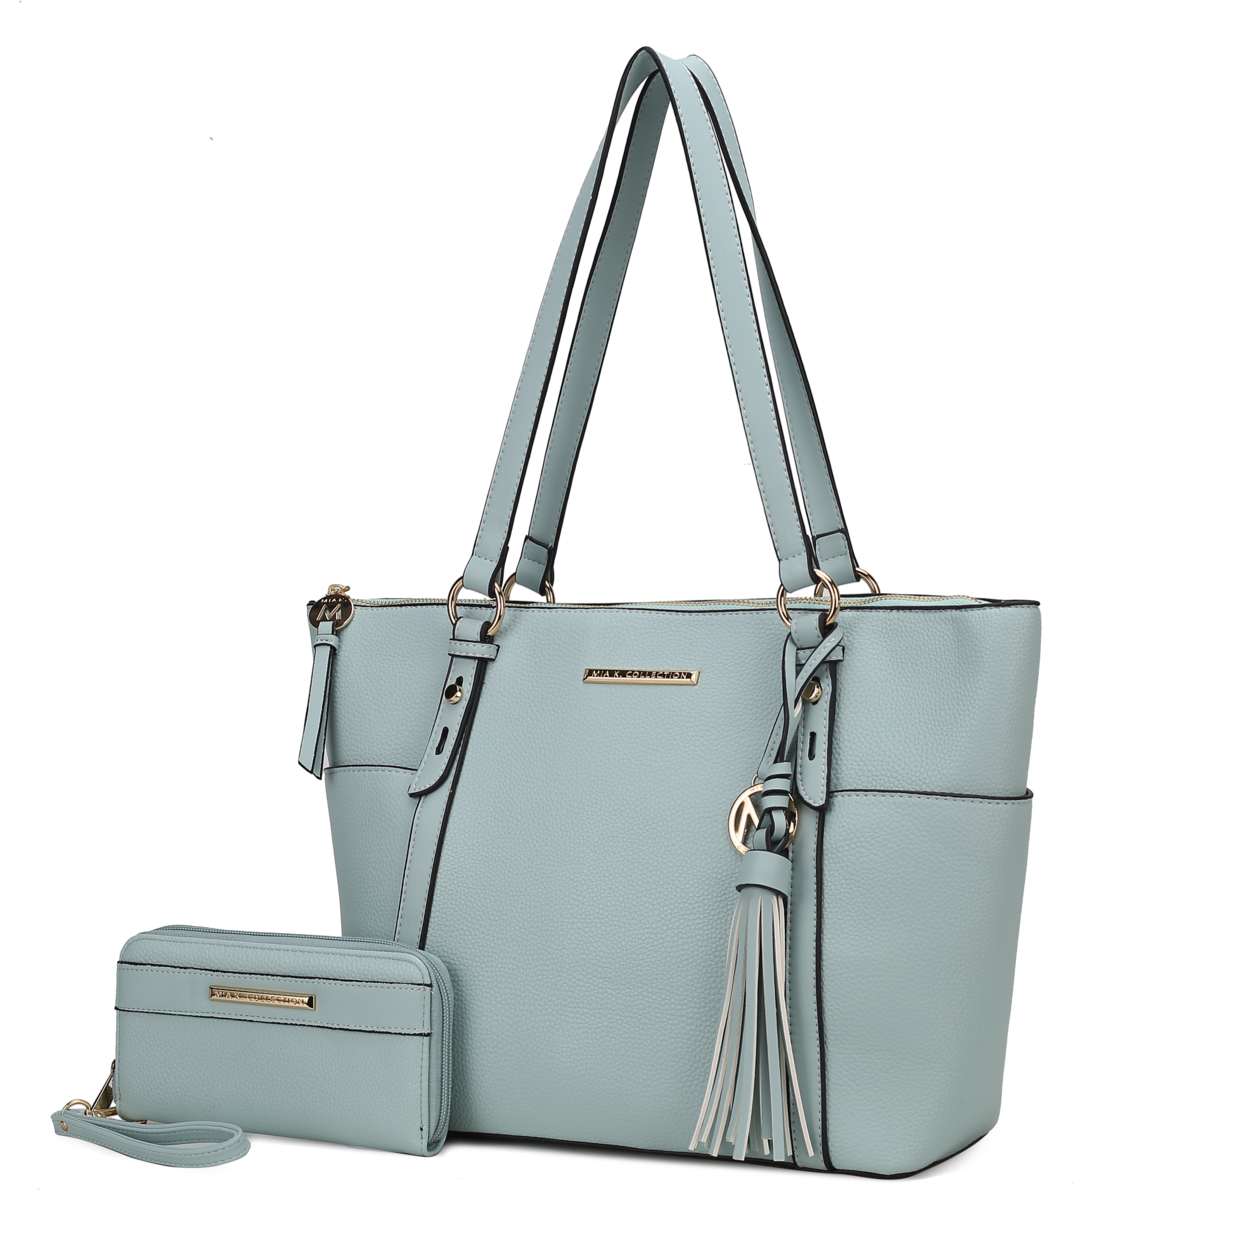 MKF Collection Gloria Vegan Leather Women's Tote Bag By Mia K With Wallet -2 Pieces - Seafoam